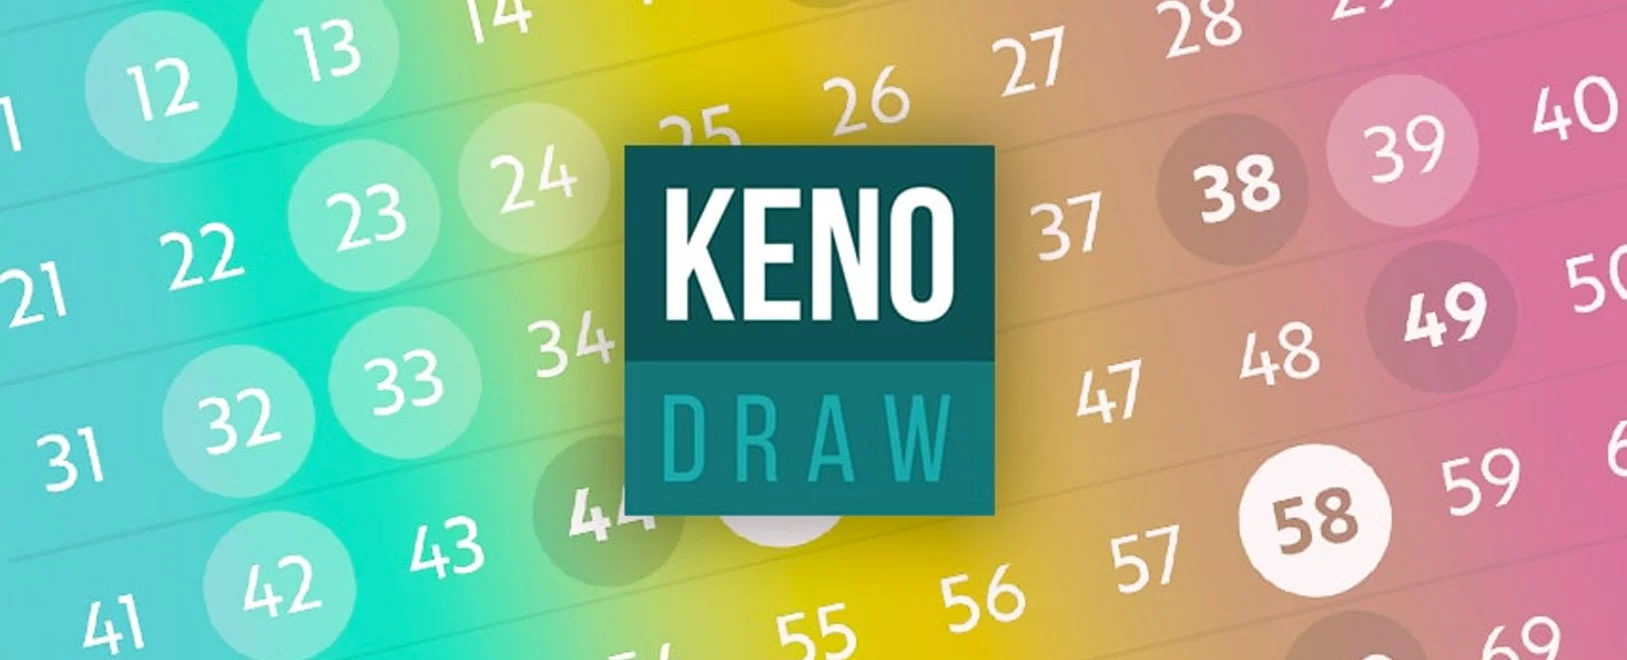 Winning Numbers: All About Keno